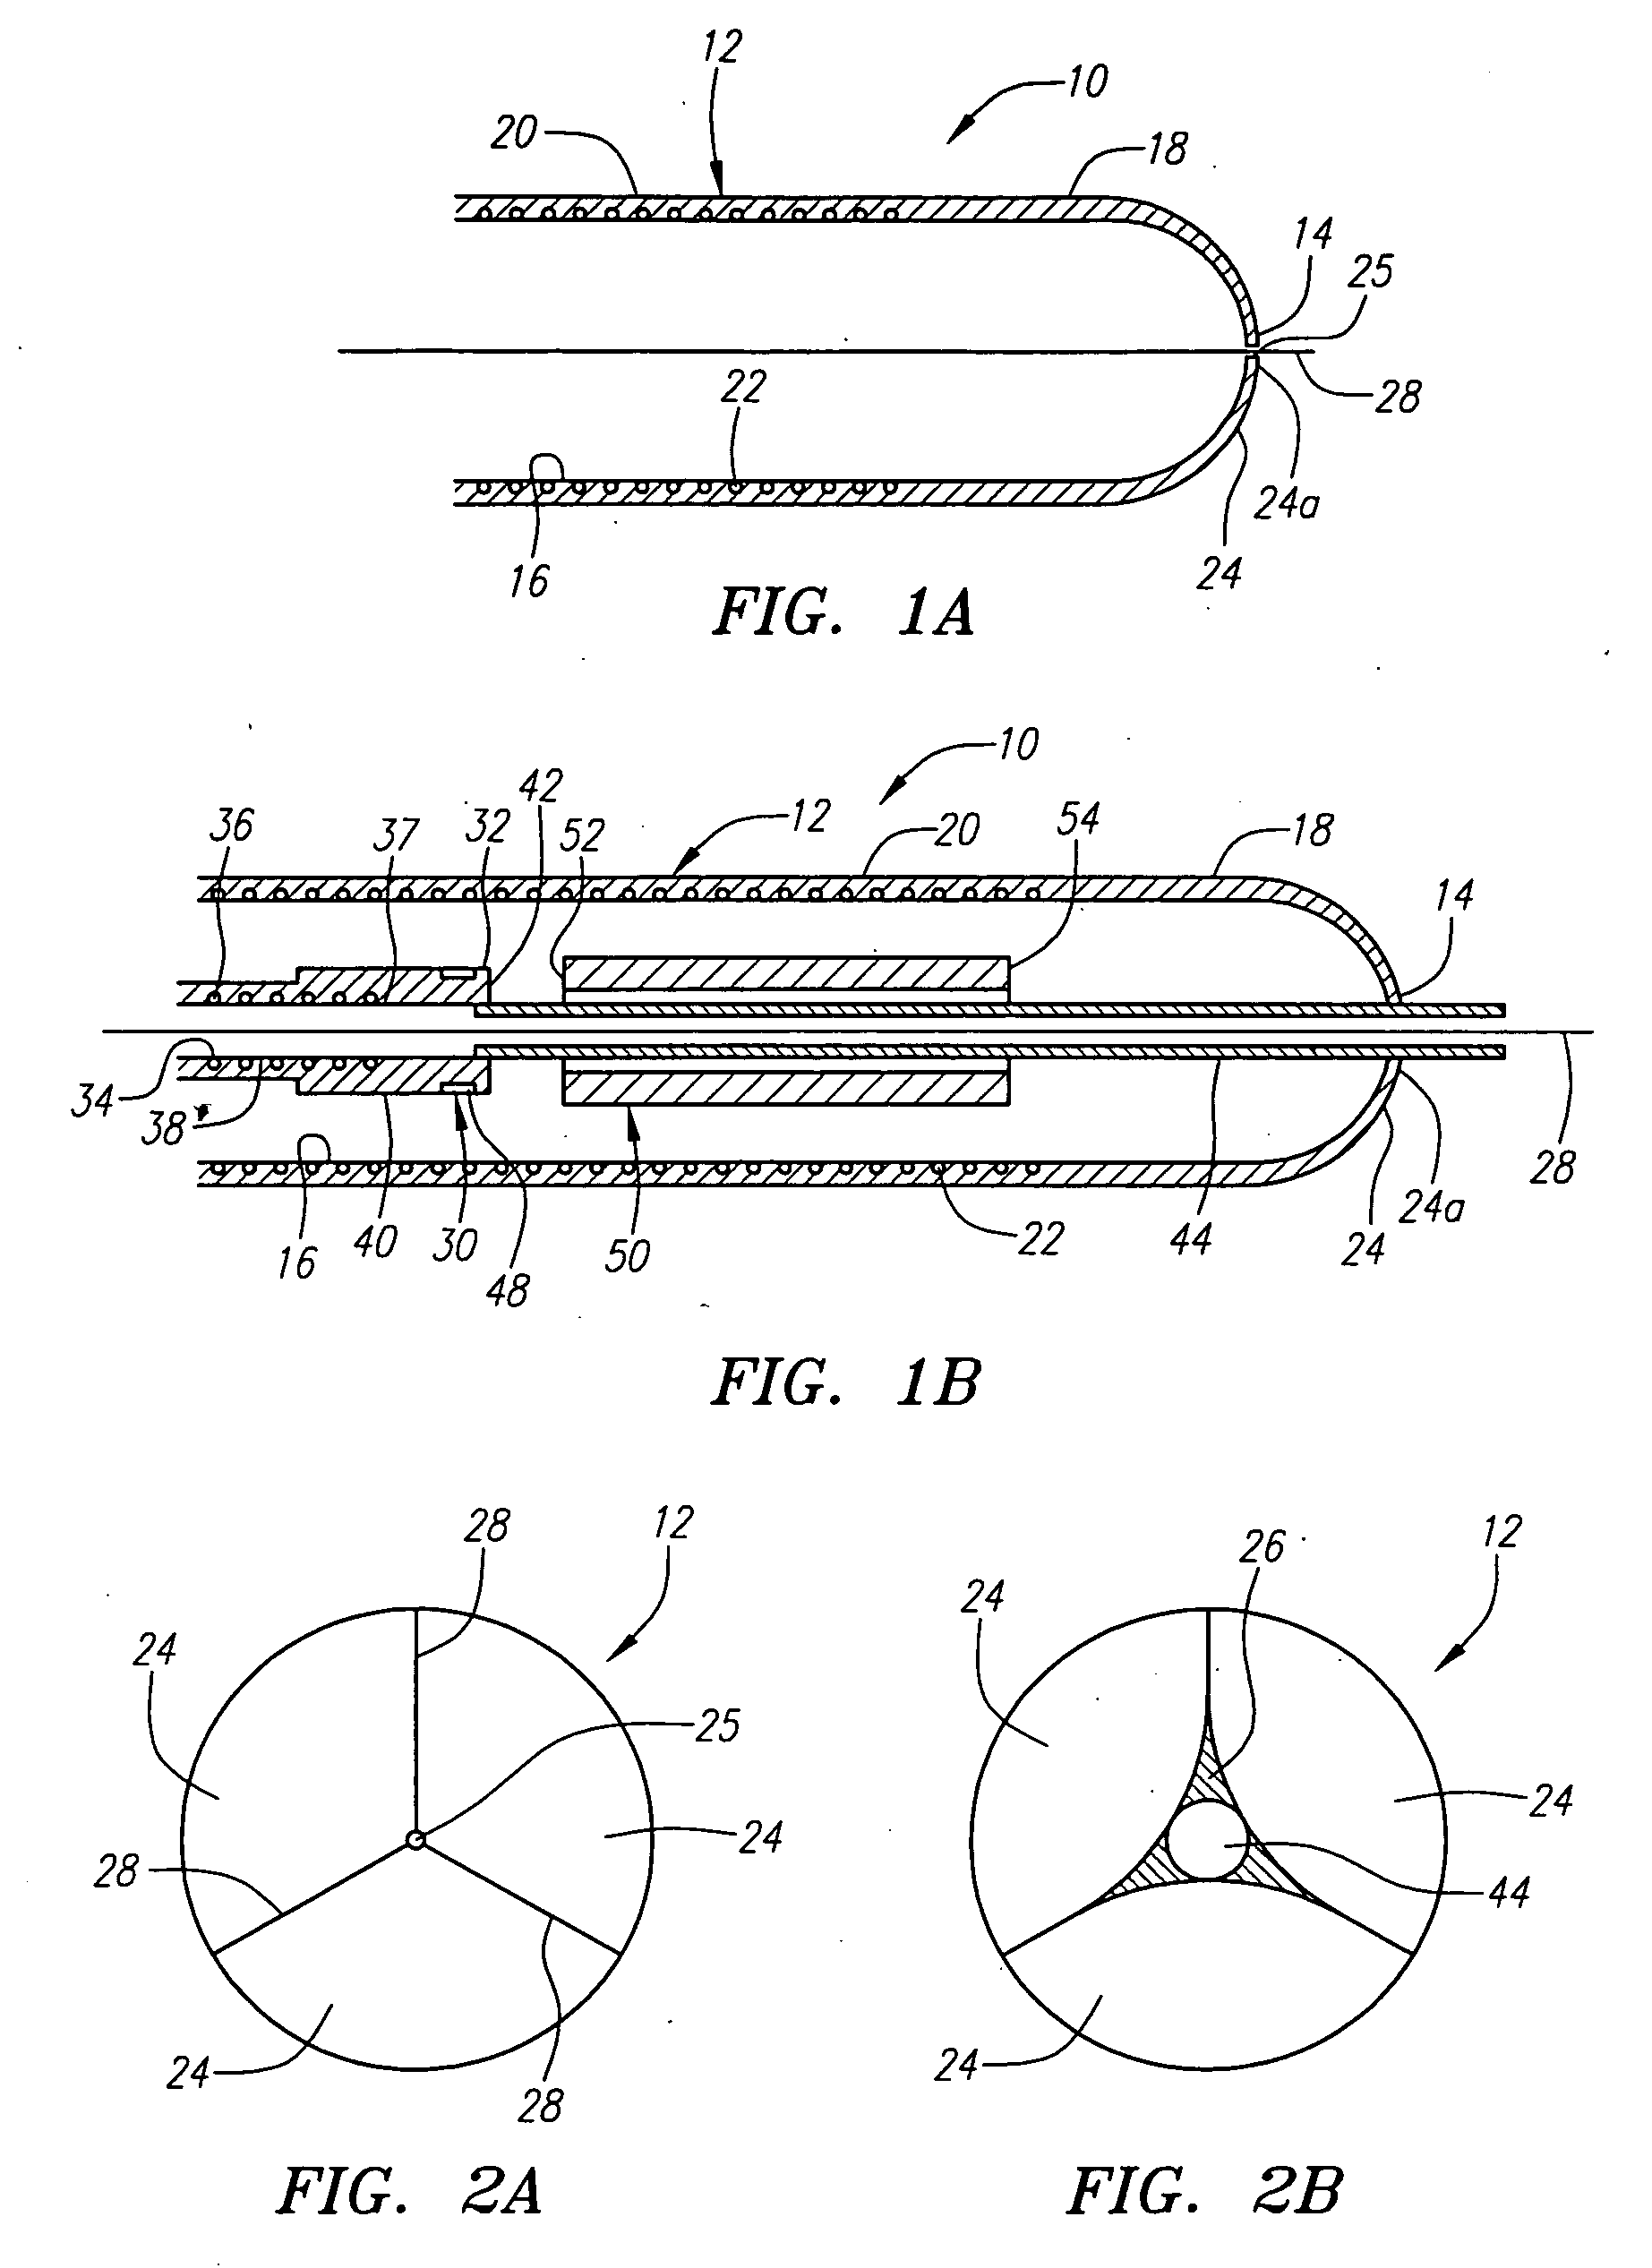 Apparatus for delivering endoluminal prostheses and methods of making and using them